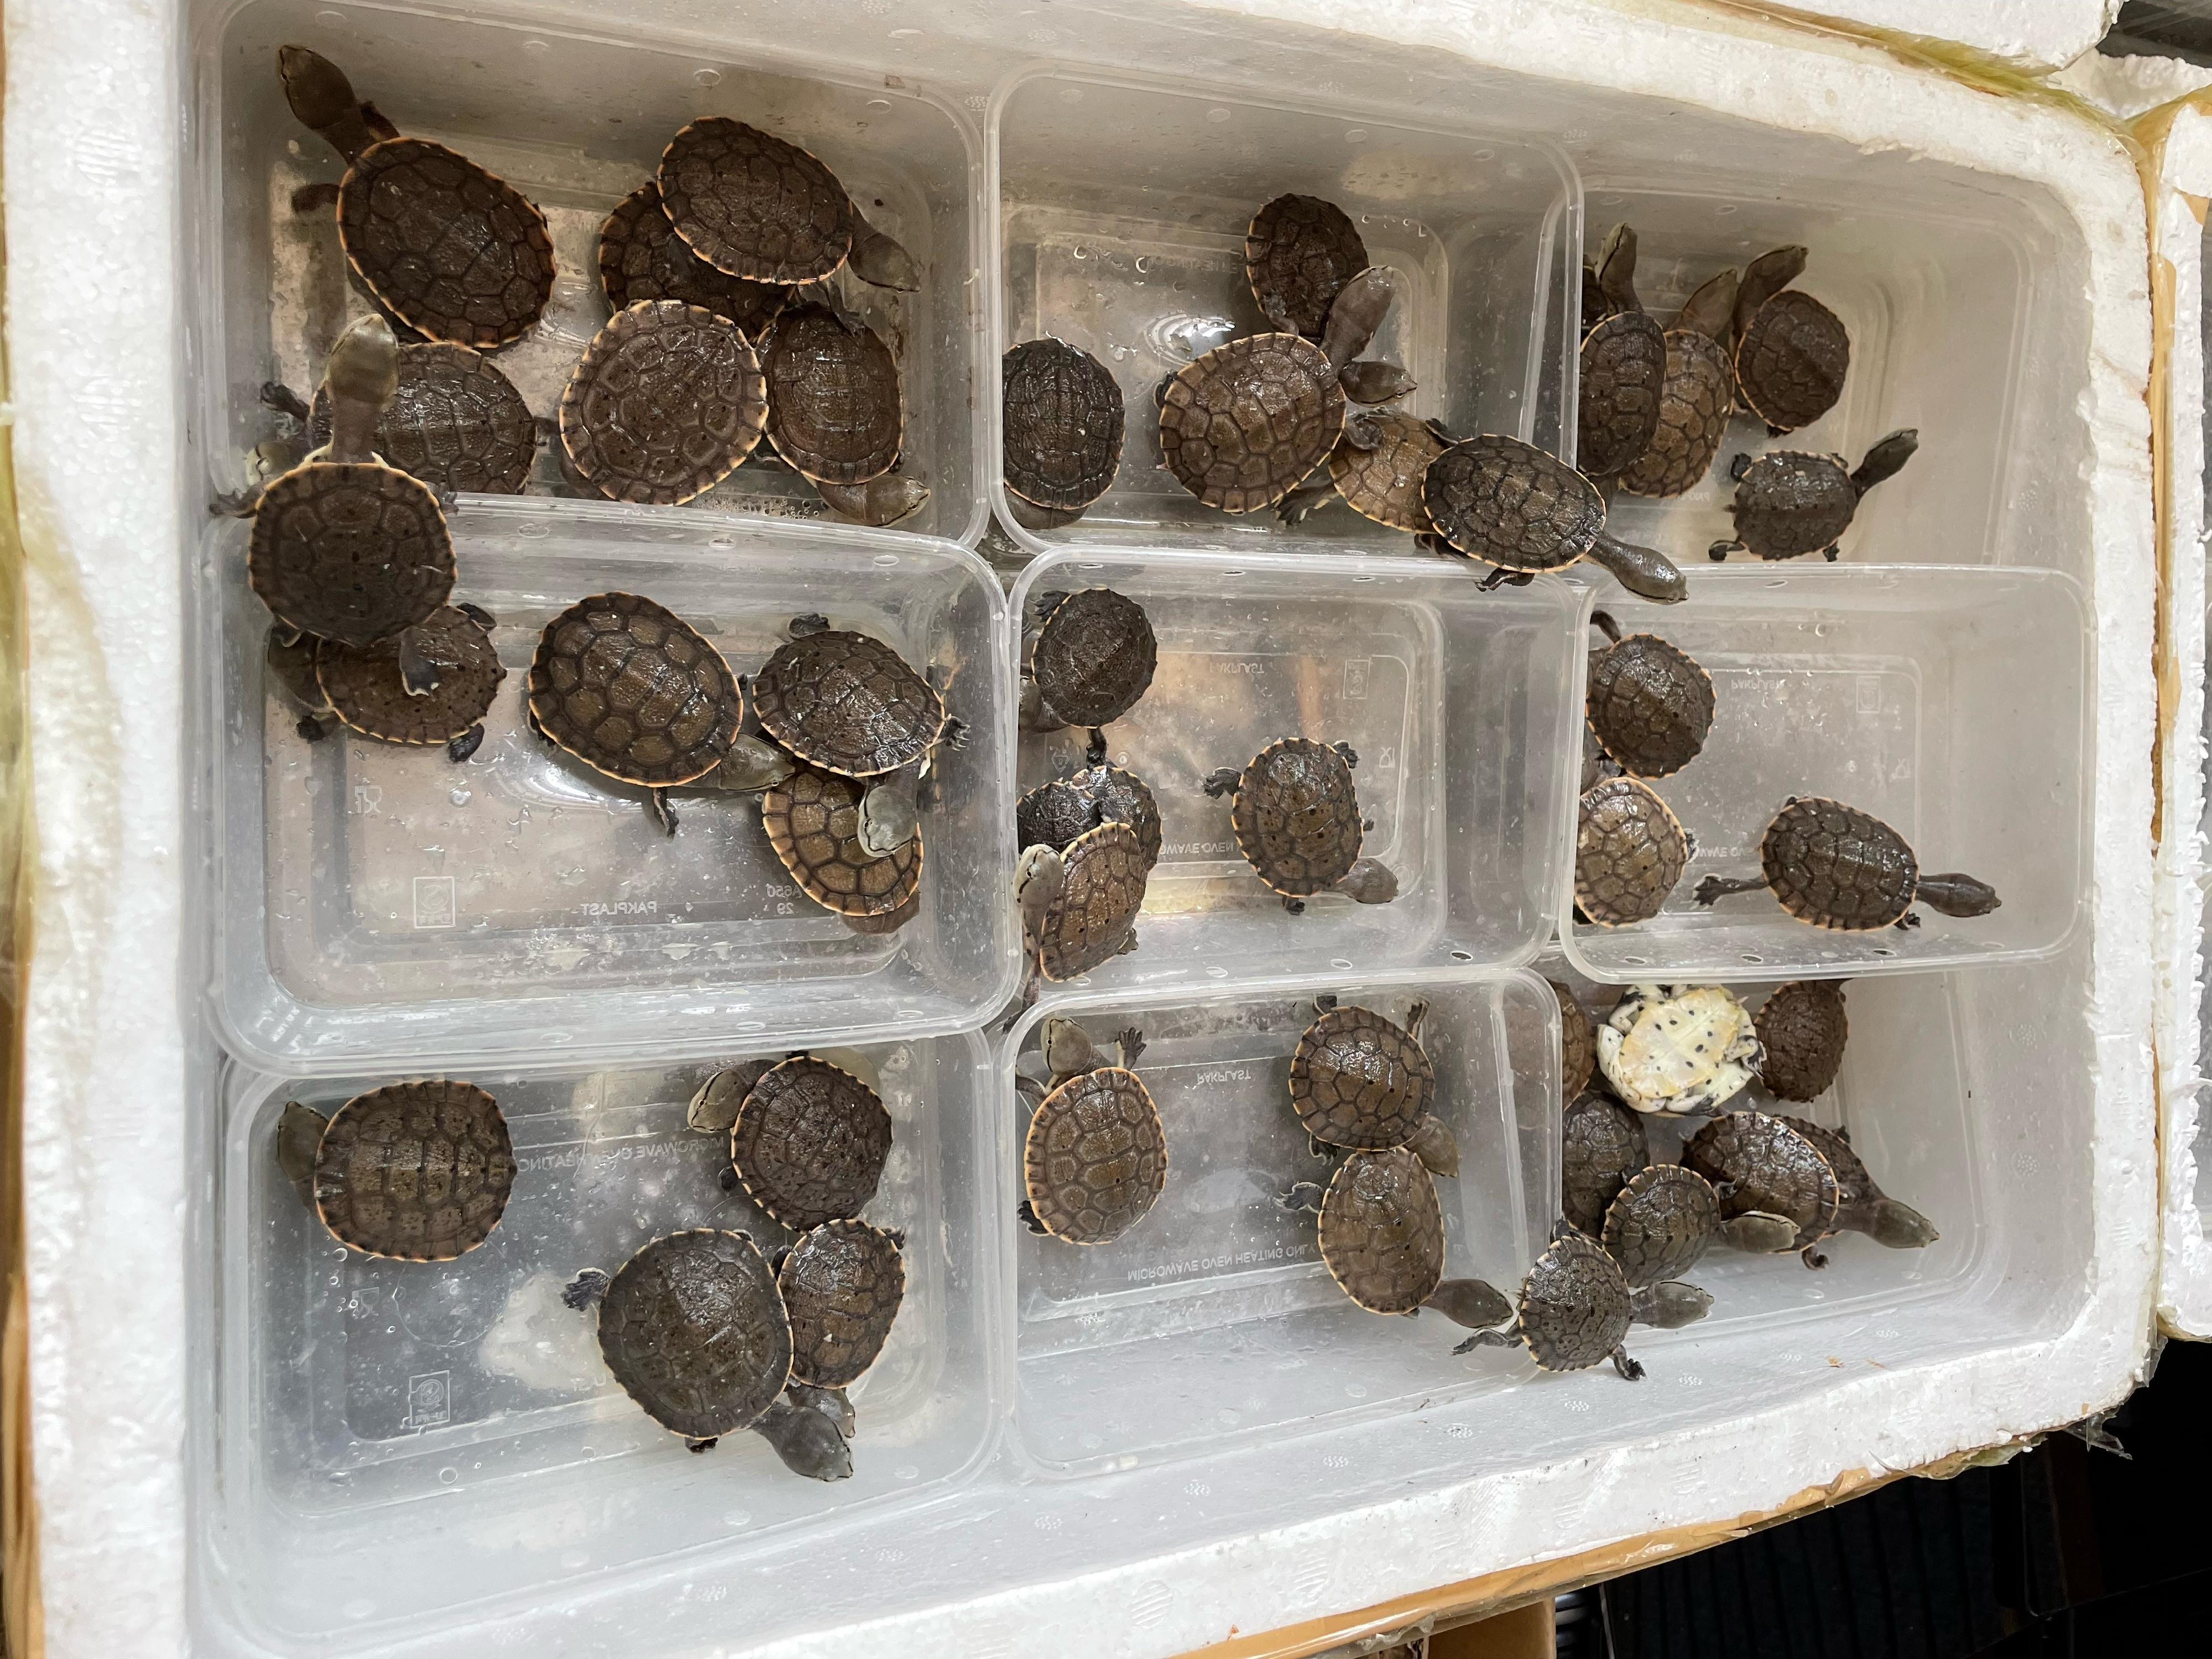 Hong Kong Customs yesterday (September 13) mounted an anti-smuggling operation in the eastern waters of Hong Kong and detected a suspected smuggling case involving speedboats. A batch of suspected smuggled goods with an estimated market value of about $800,000 was seized. Photo shows some of the suspected smuggled live turtles seized.